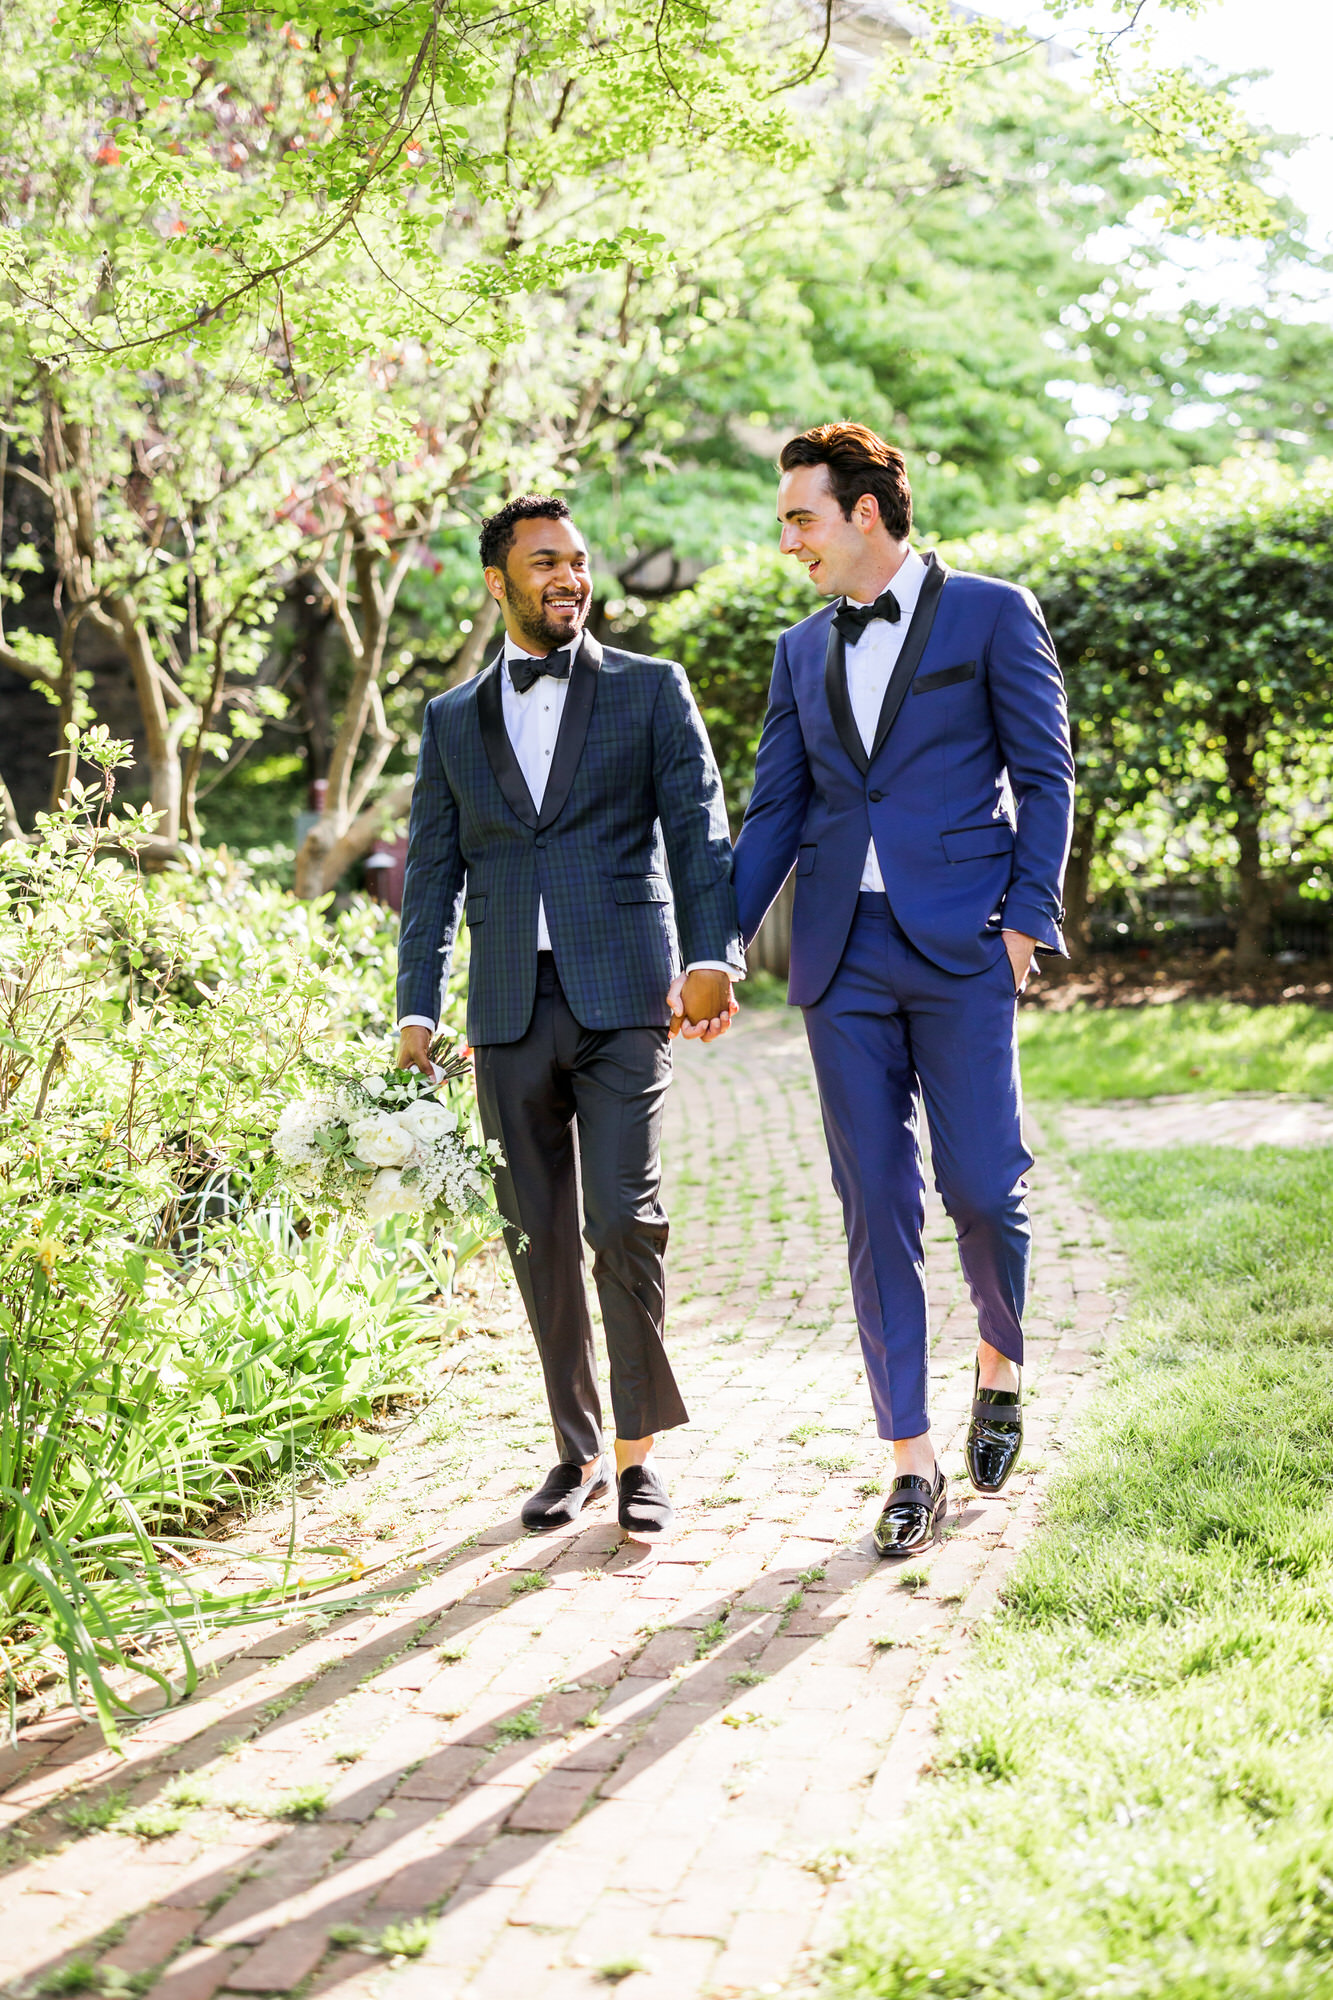 grooms walking hand in hand during outdoor bridal session